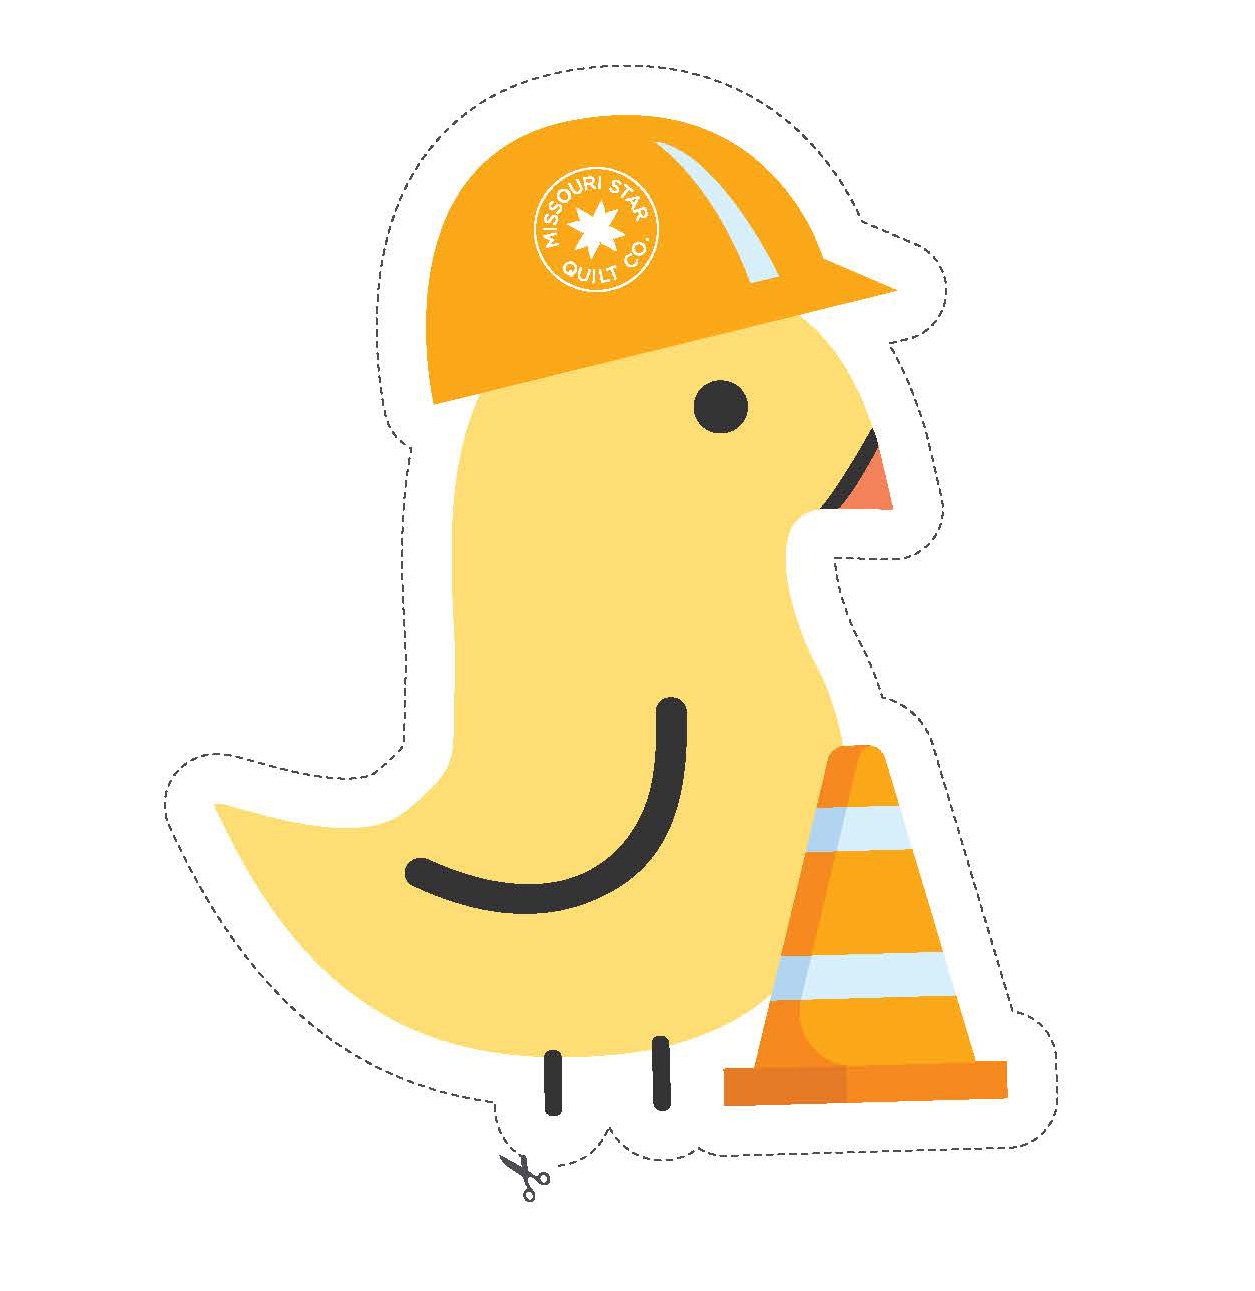 Download Construction Chuck as a free printable PDF!